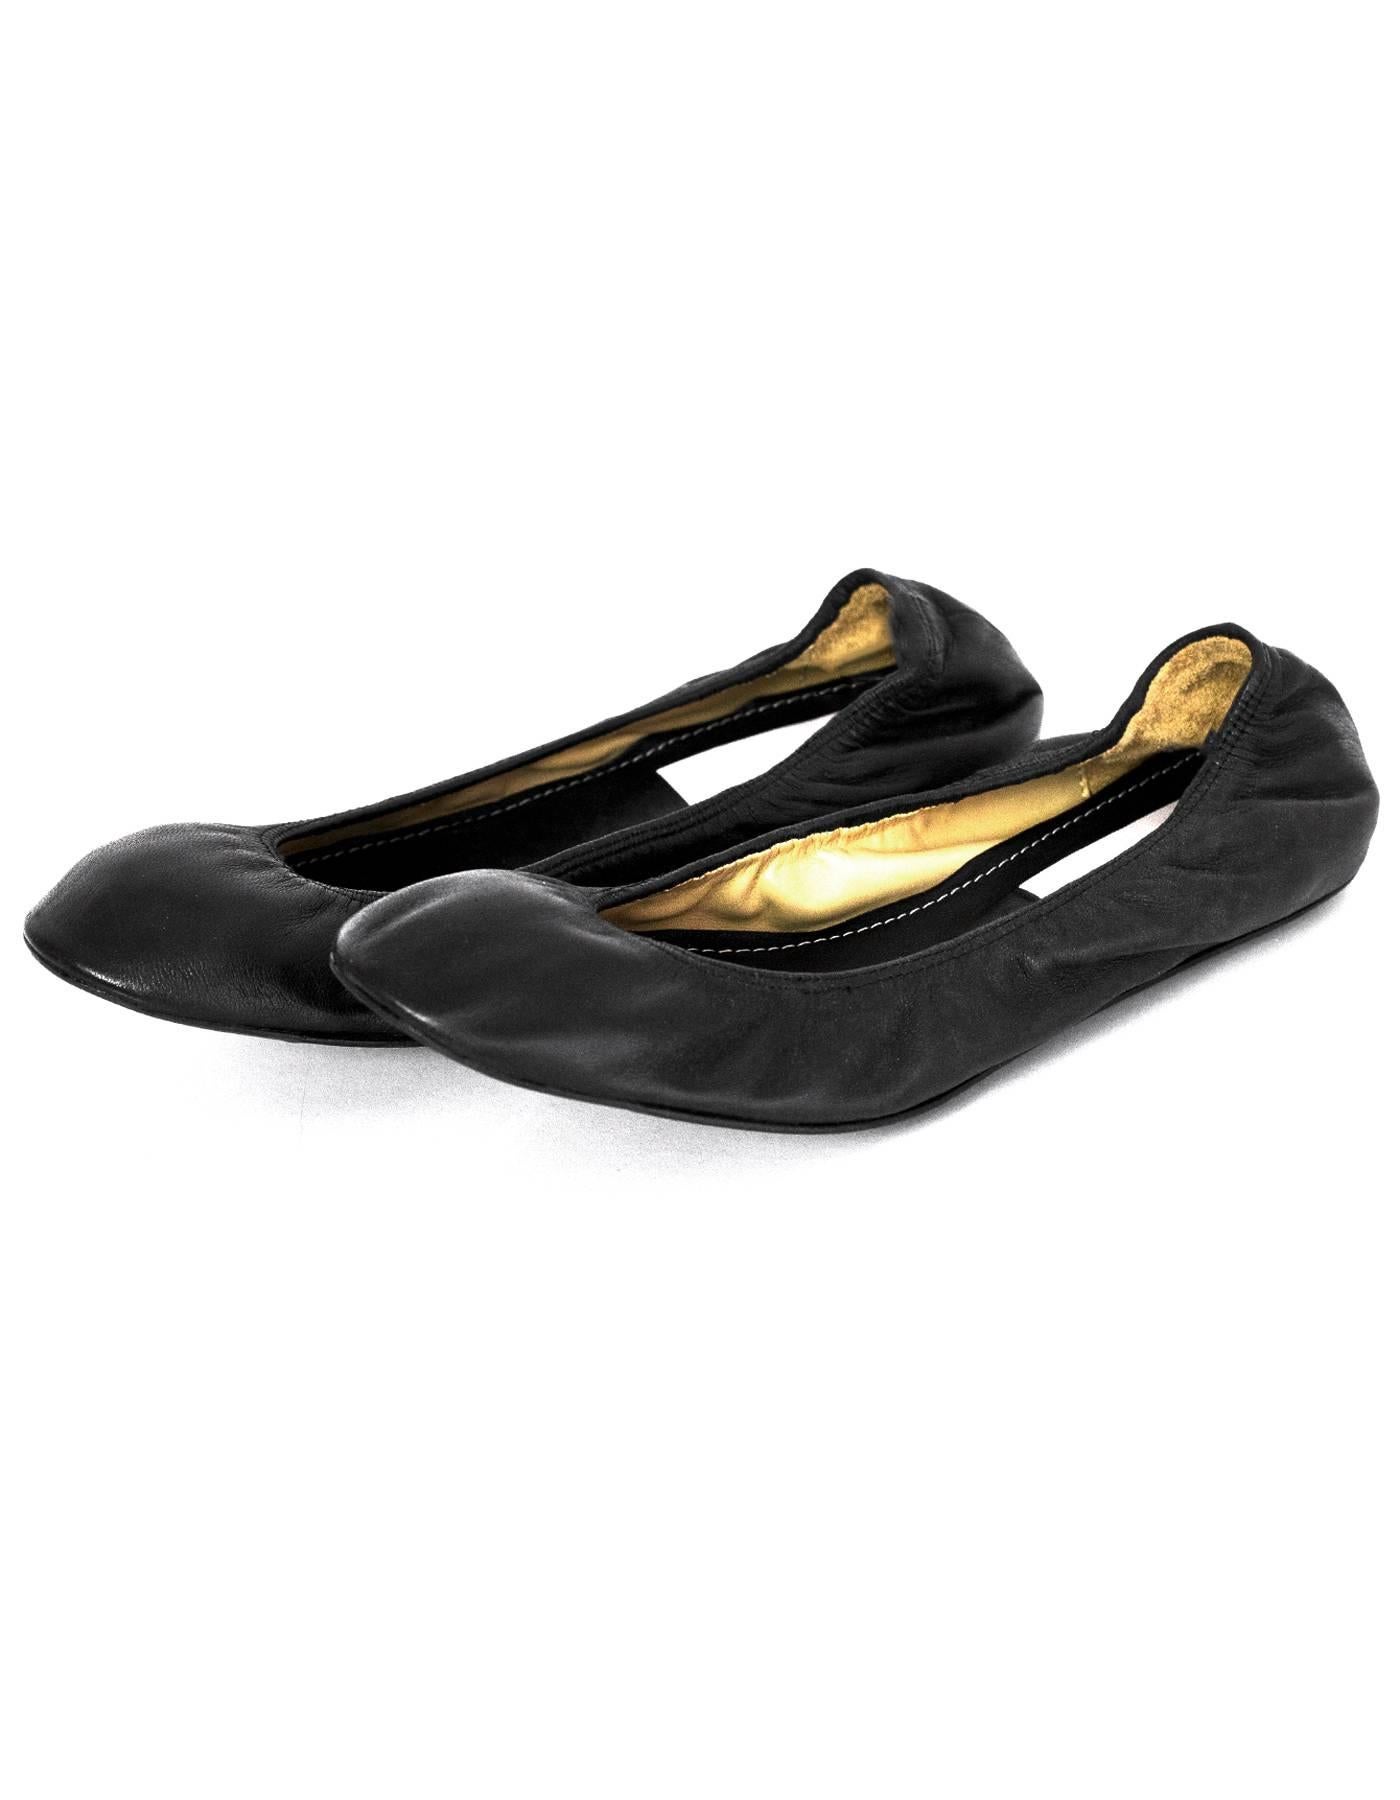 Lanvin Black Leather Stretch Flats Sz 39 NIB

Color: Black
Materials: Leather
Closure/Opening: Slide on
Sole Stamp: Lanvin 39
Overall Condition: Excellent pre-owned - NIB
Includes: Lanvin box
Marked Size: 39
Heel Height: .25